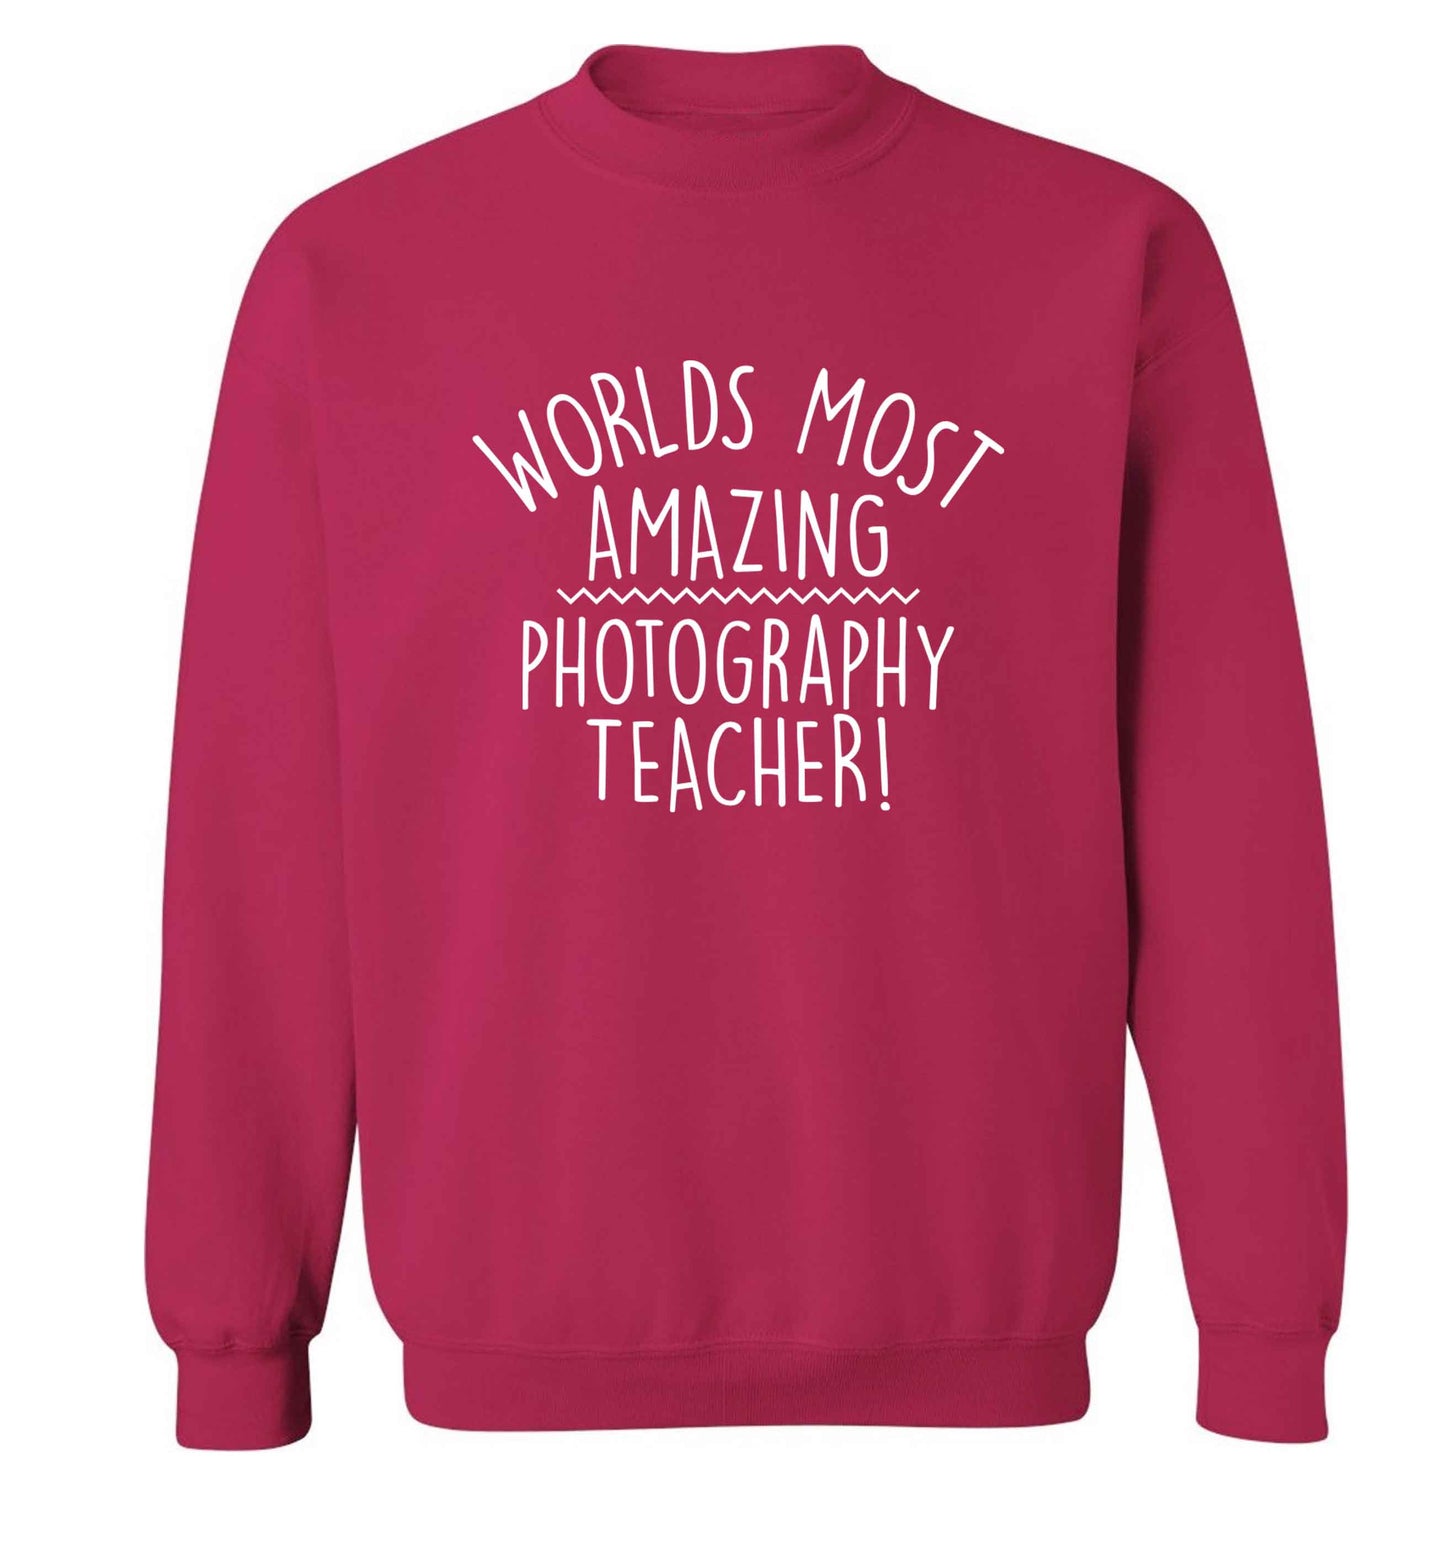 Worlds most amazing photography teacher adult's unisex pink sweater 2XL